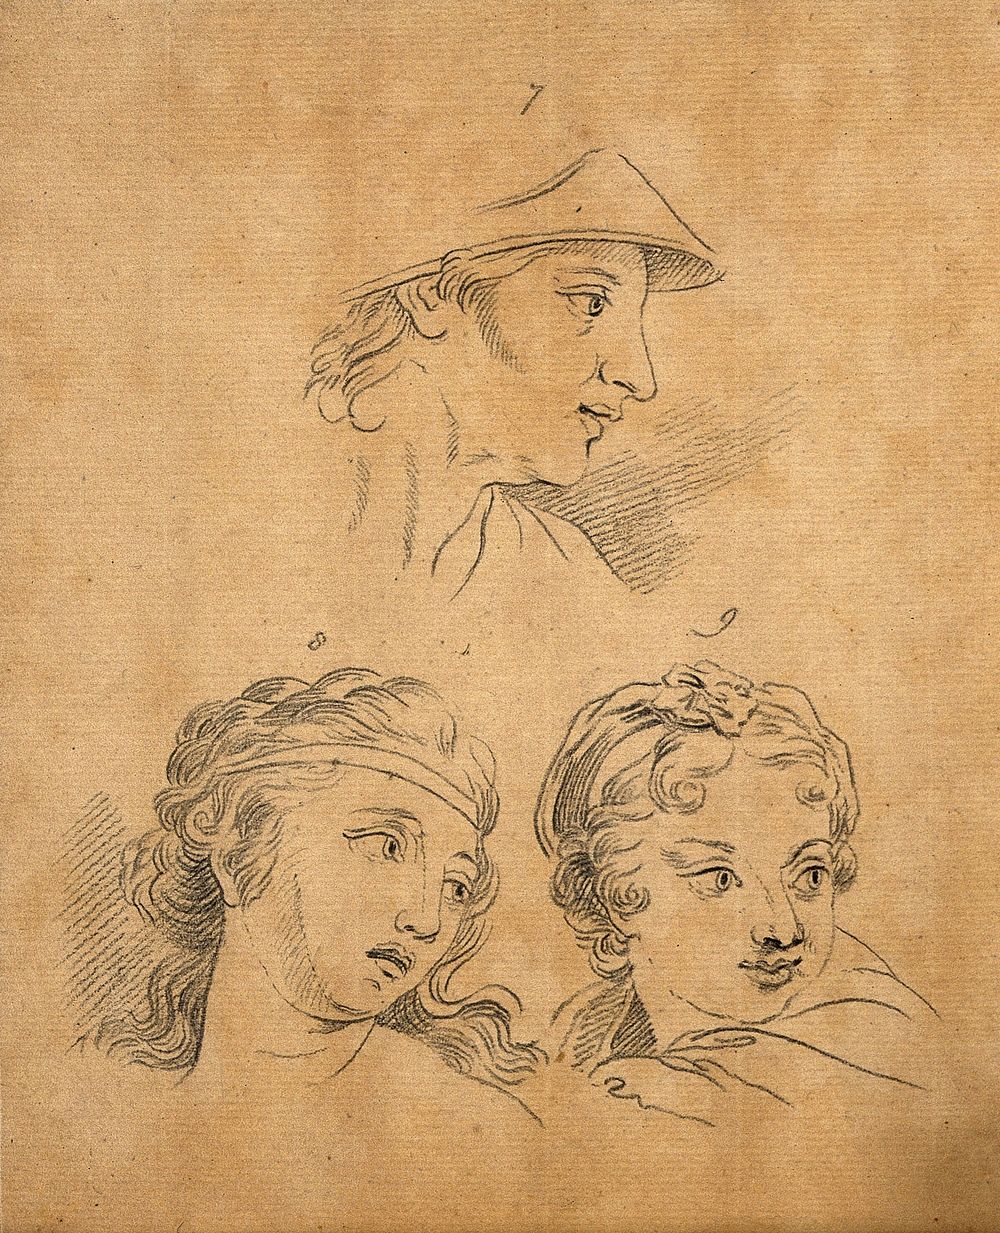 Eight physiognomies. Drawings by D.N. Chodowiecki, ca. 1789, after C. Le Brun.